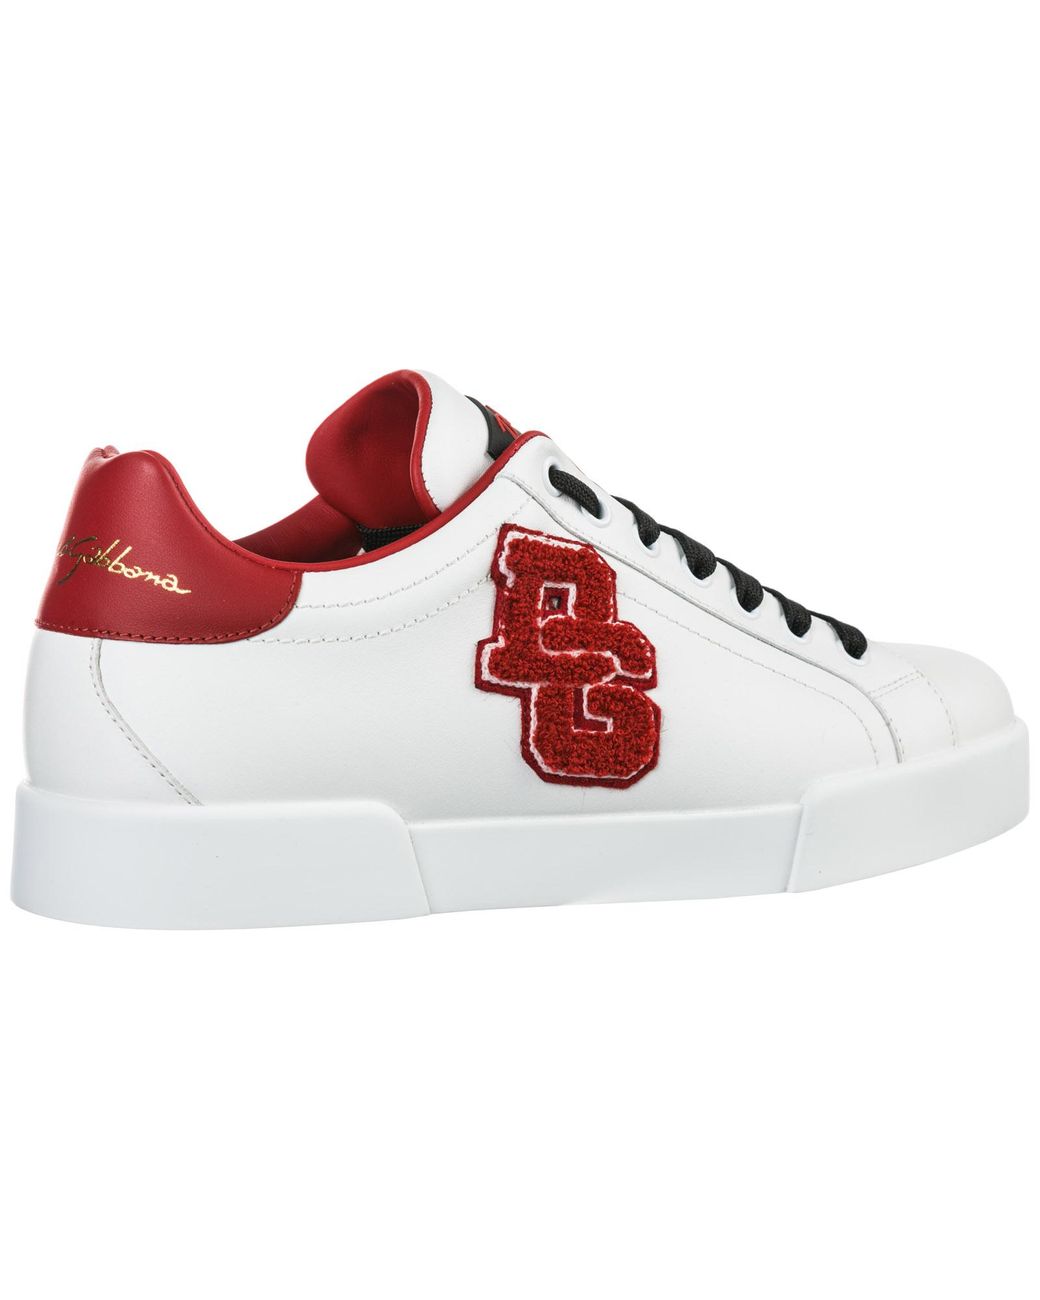 Dolce & Gabbana Shoes Leather Trainers Sneakers Portofino for Men 